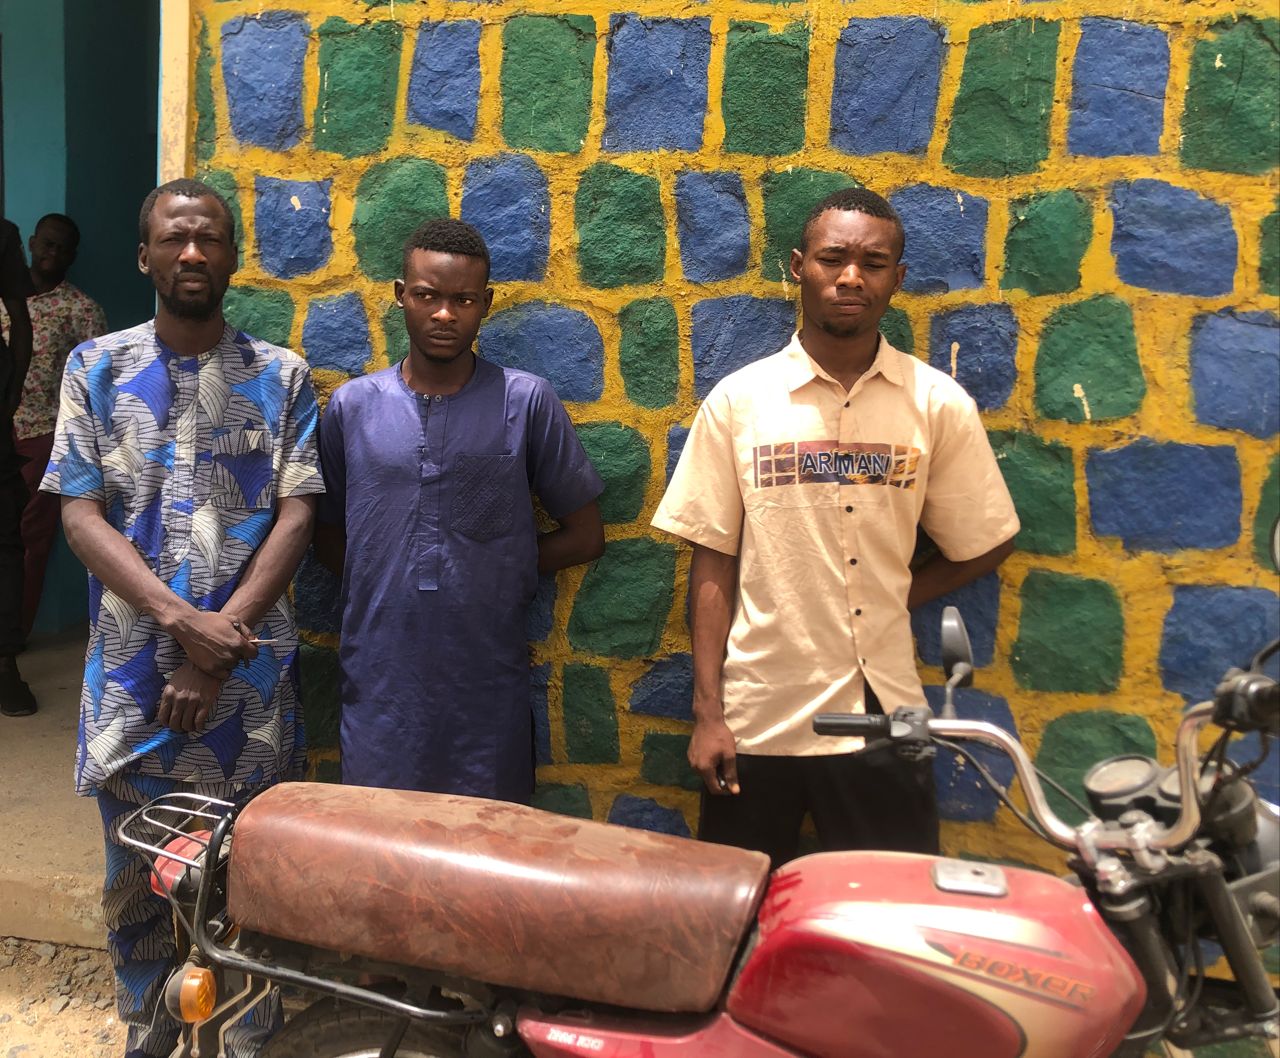 Police arrest 3 suspects of motorcycle theft in Bauchi